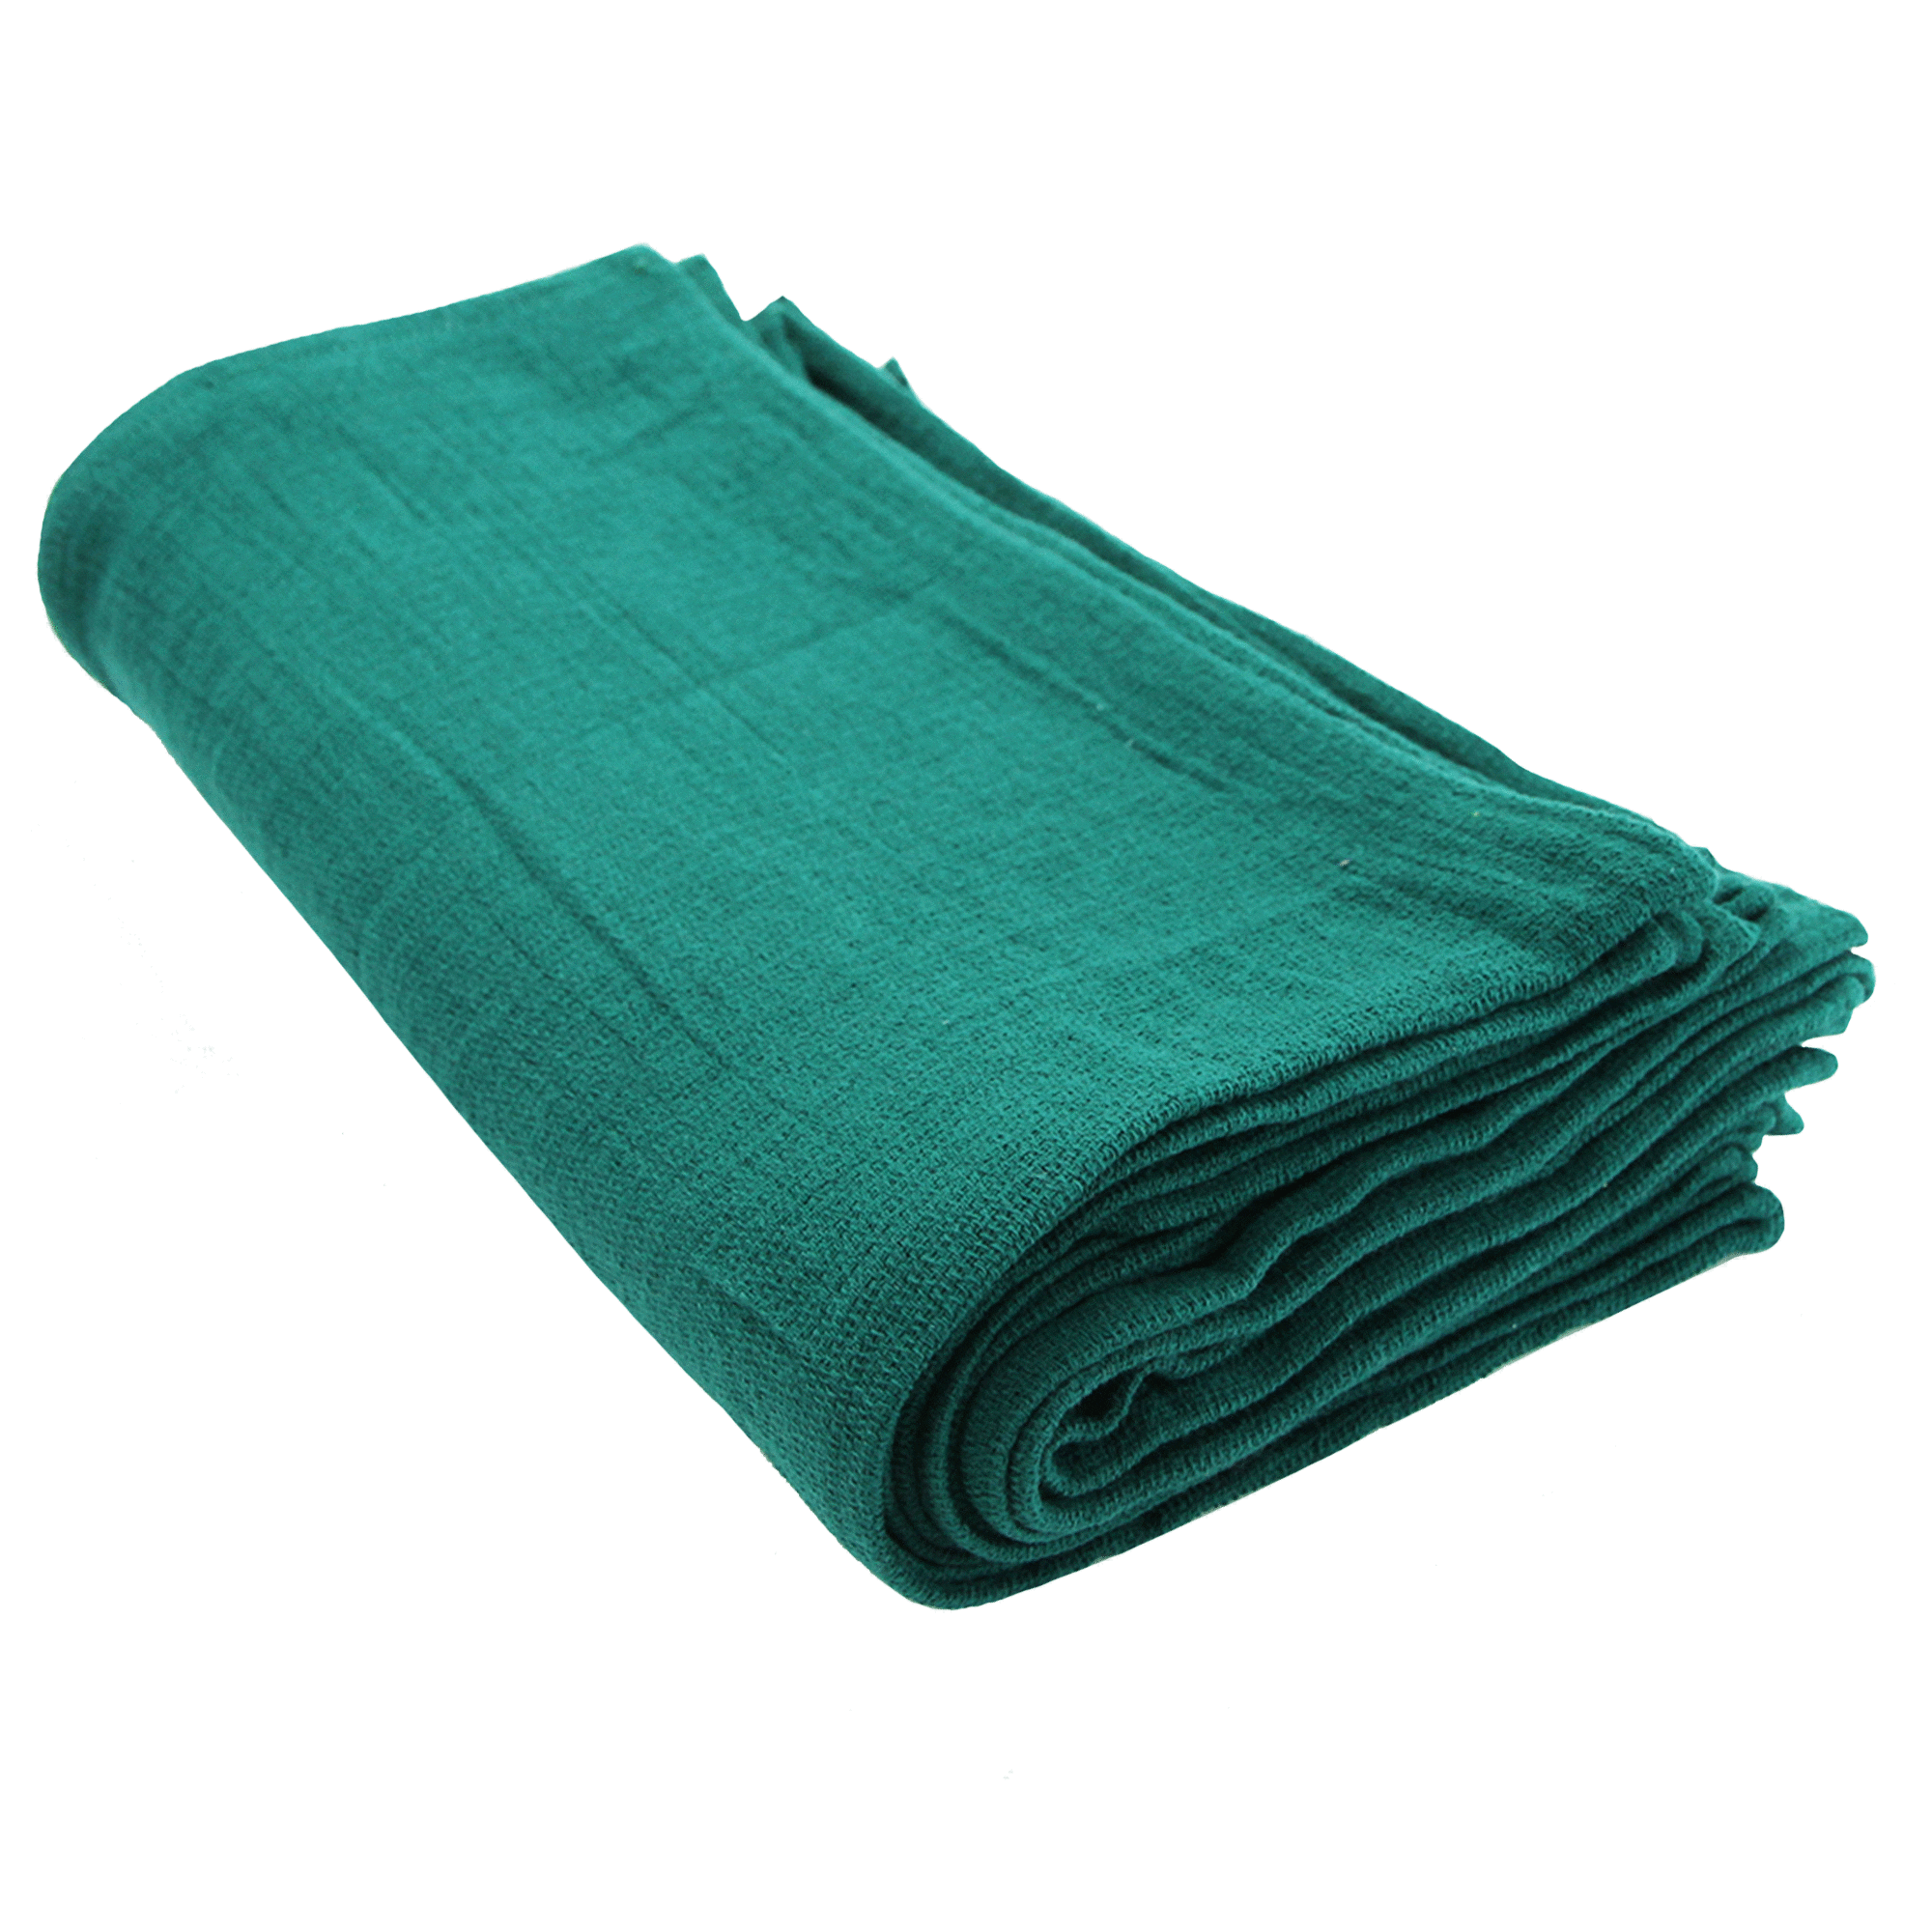 What are Huck Towels? And why are they so Popular?